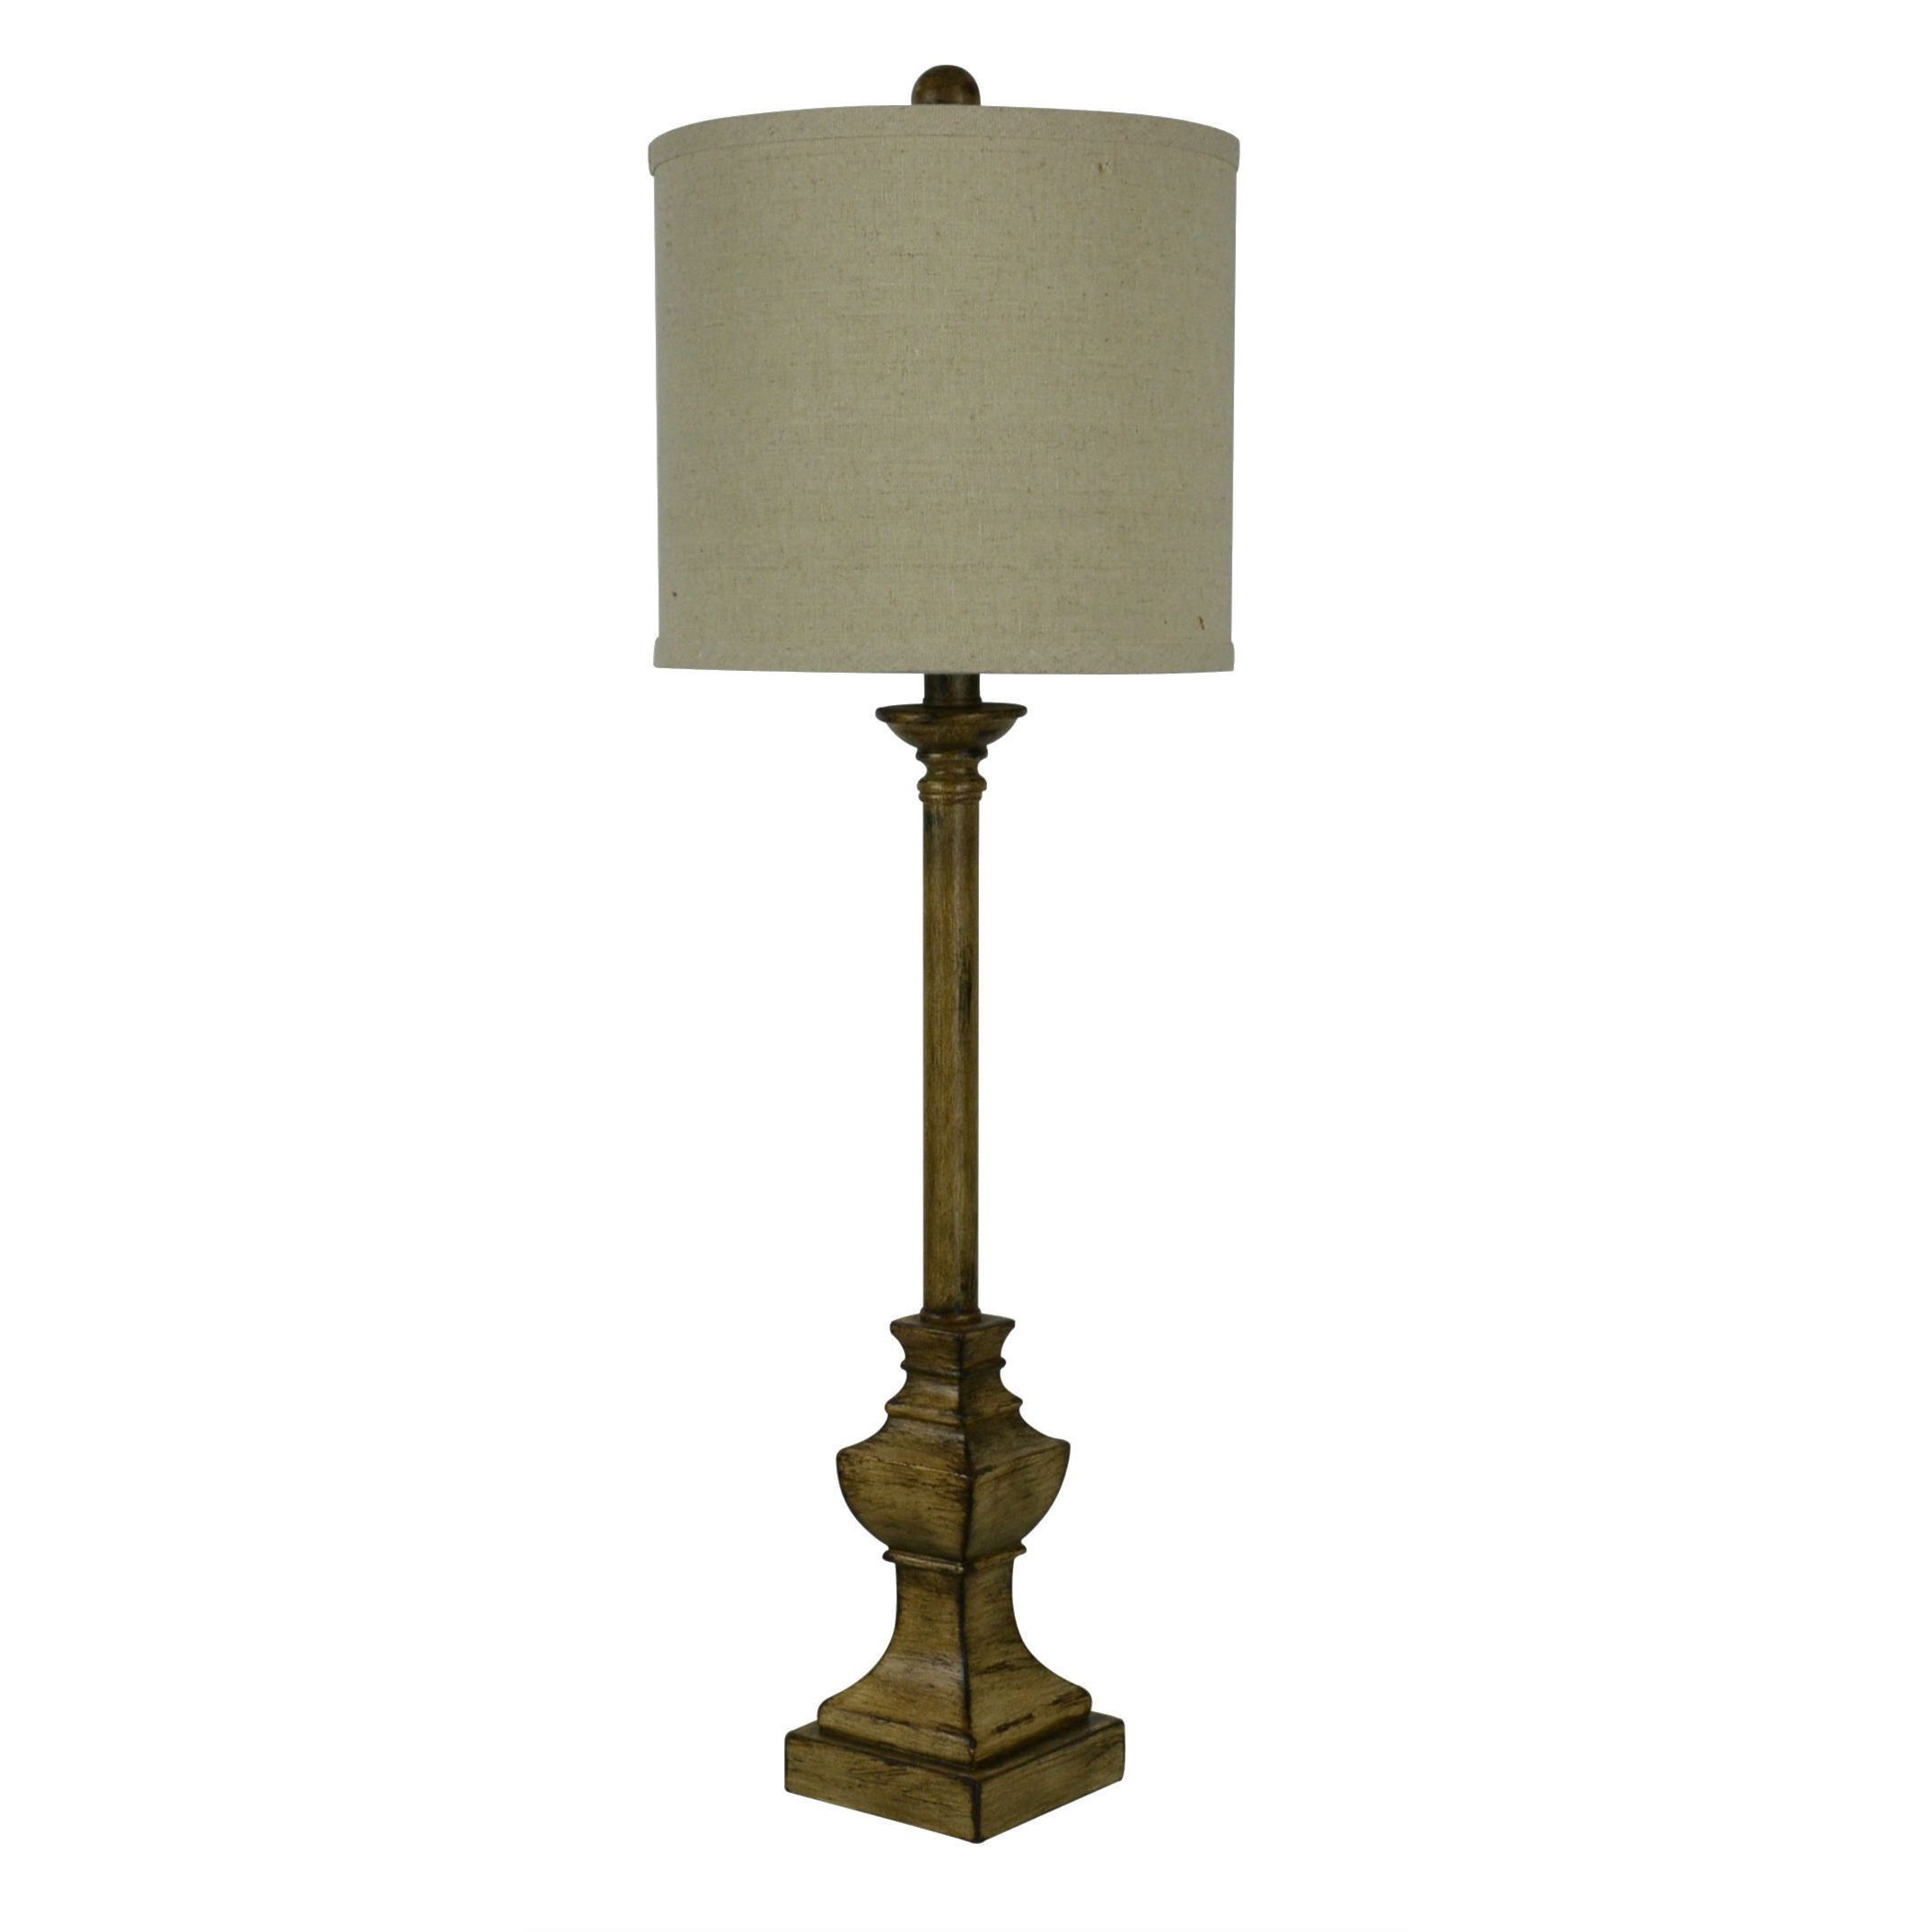 Antique Brass Box Pleat Table Lamp Dunelm Downton Decor within sizing 2151 X 2151